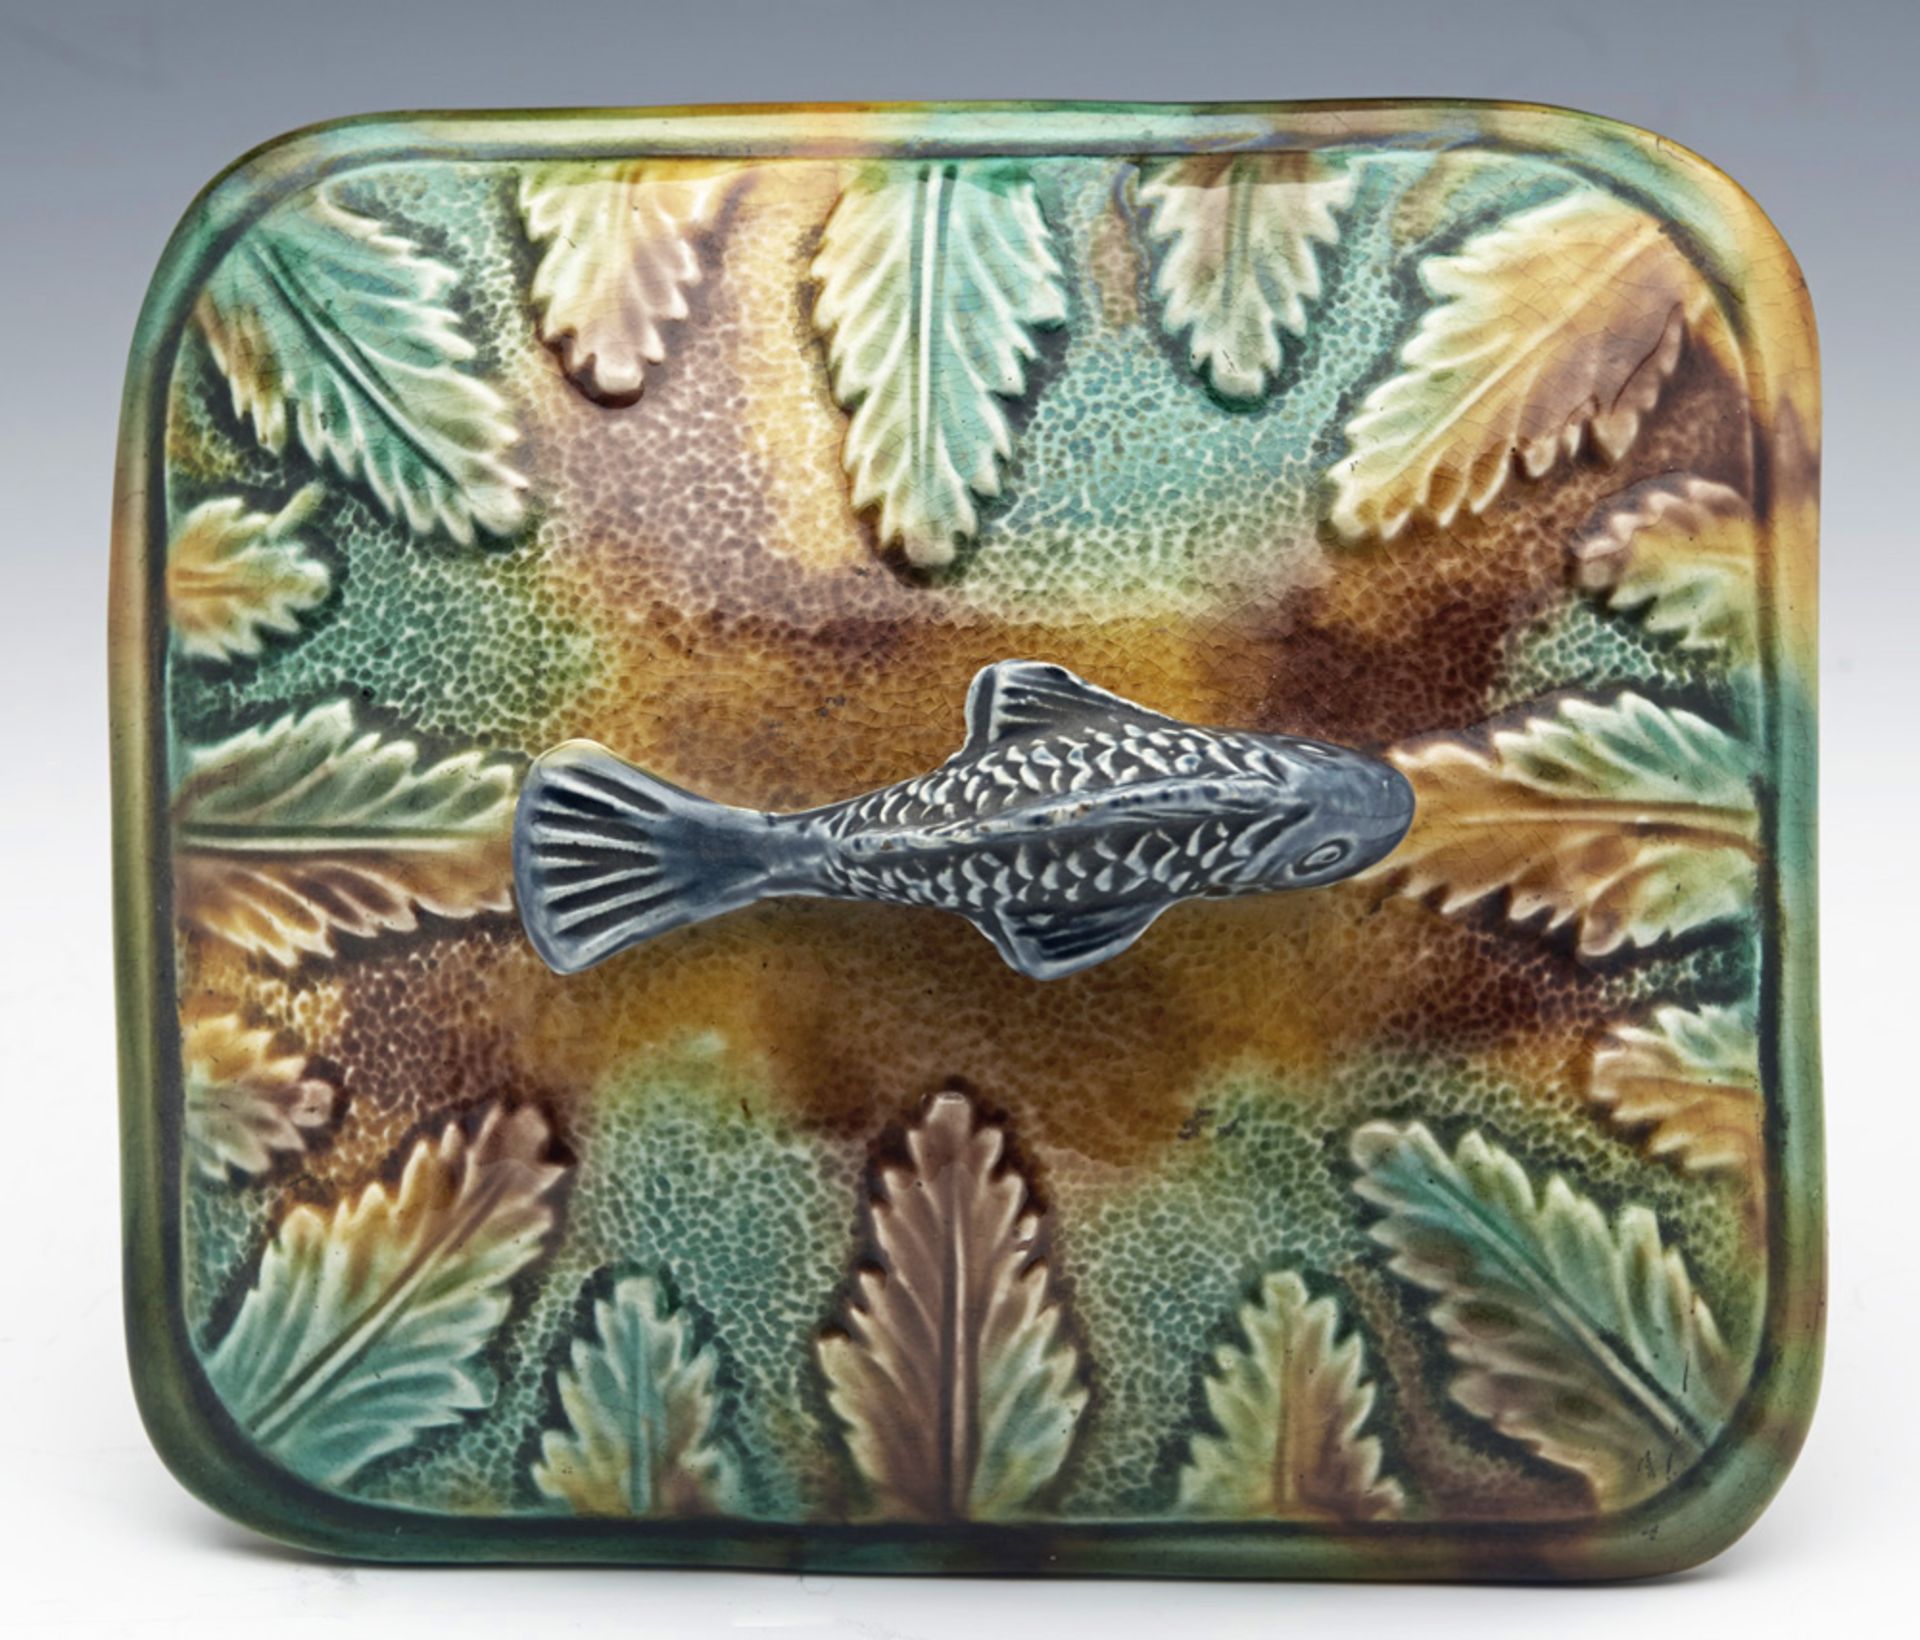 Rare Antique English Majolica Sardine Dish With Fish And Leaves C.1865 - Image 7 of 10